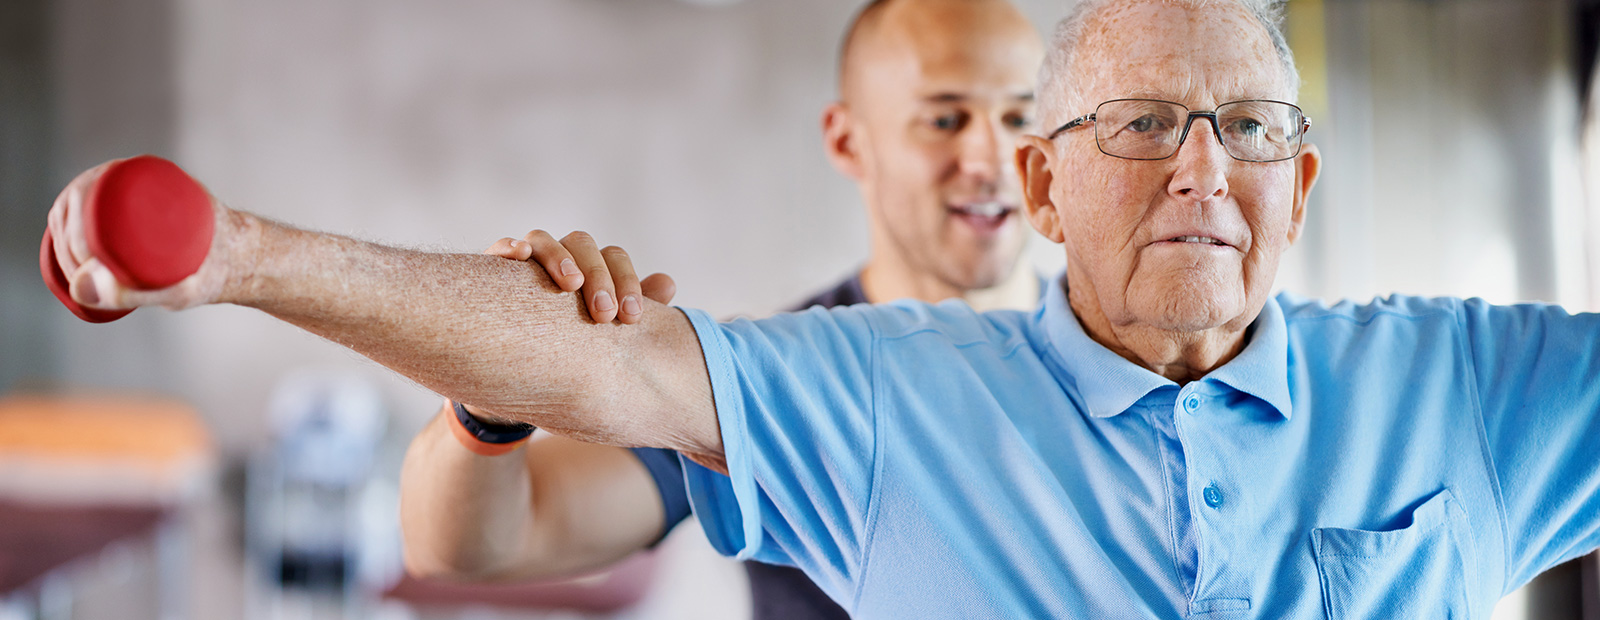 younger man helping elderly man with weights